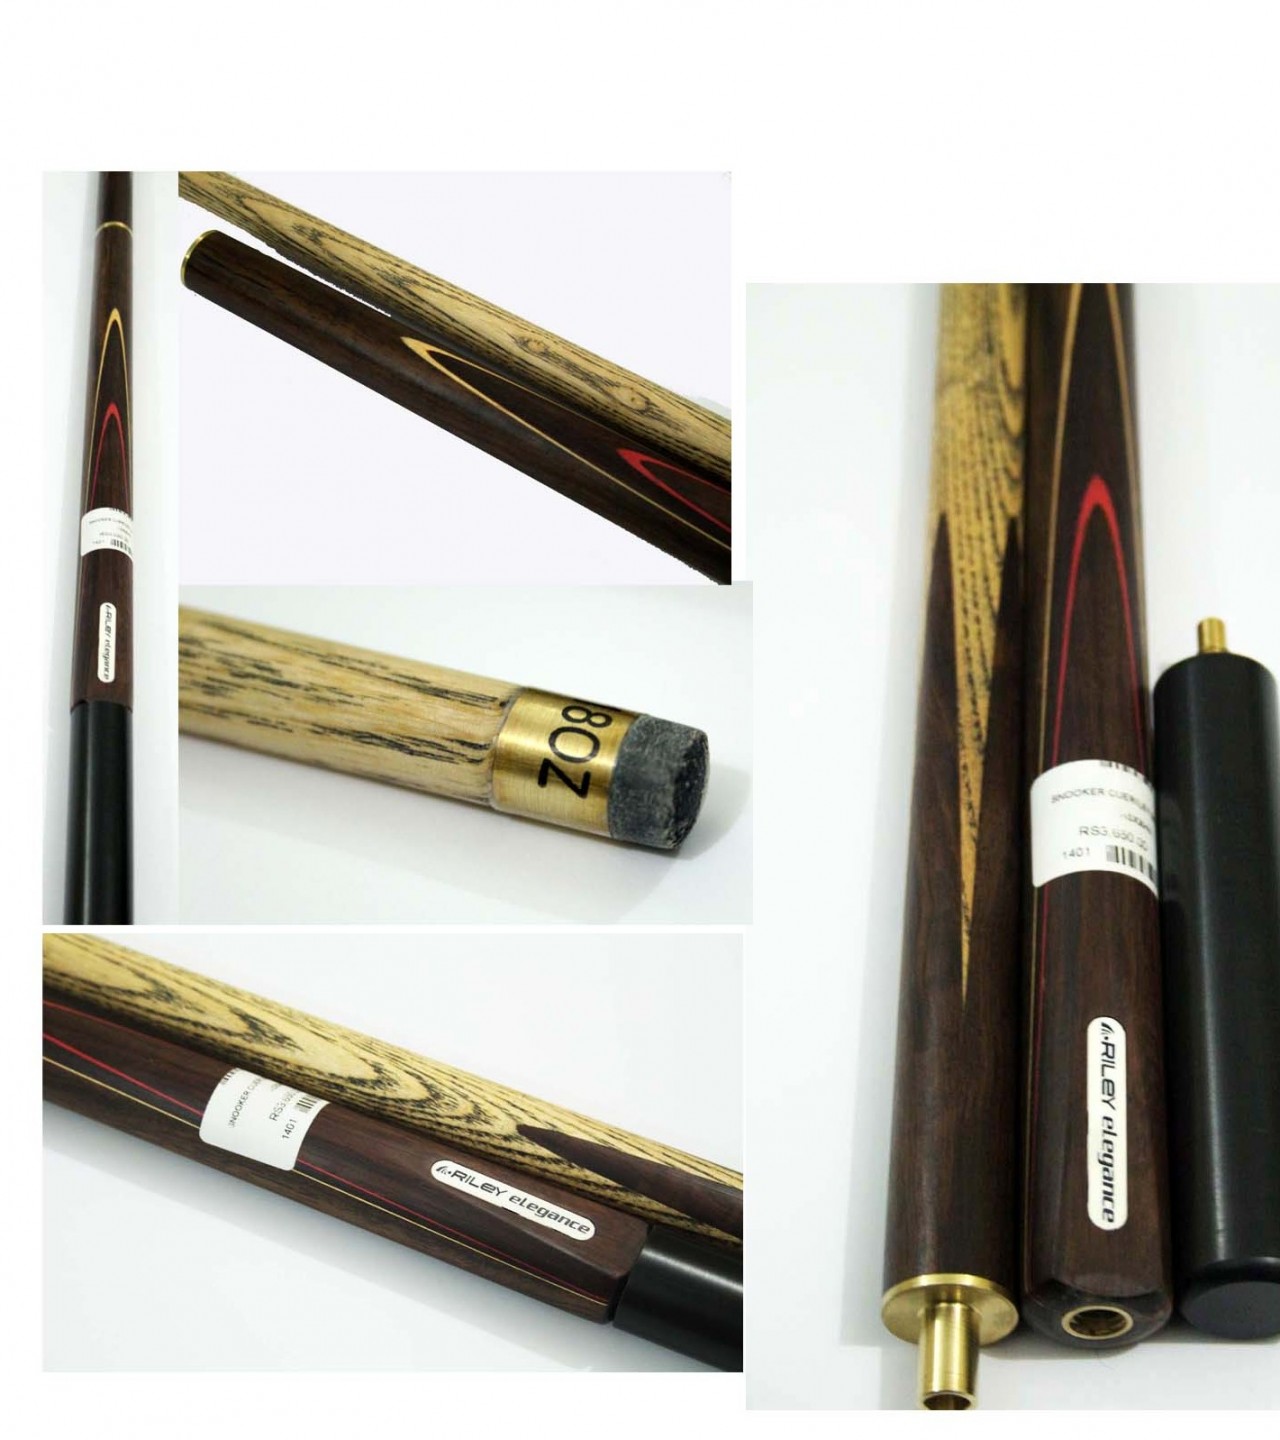 Snooker cue 3 piece Riley Elegance 57 inch With Leather Cue Case